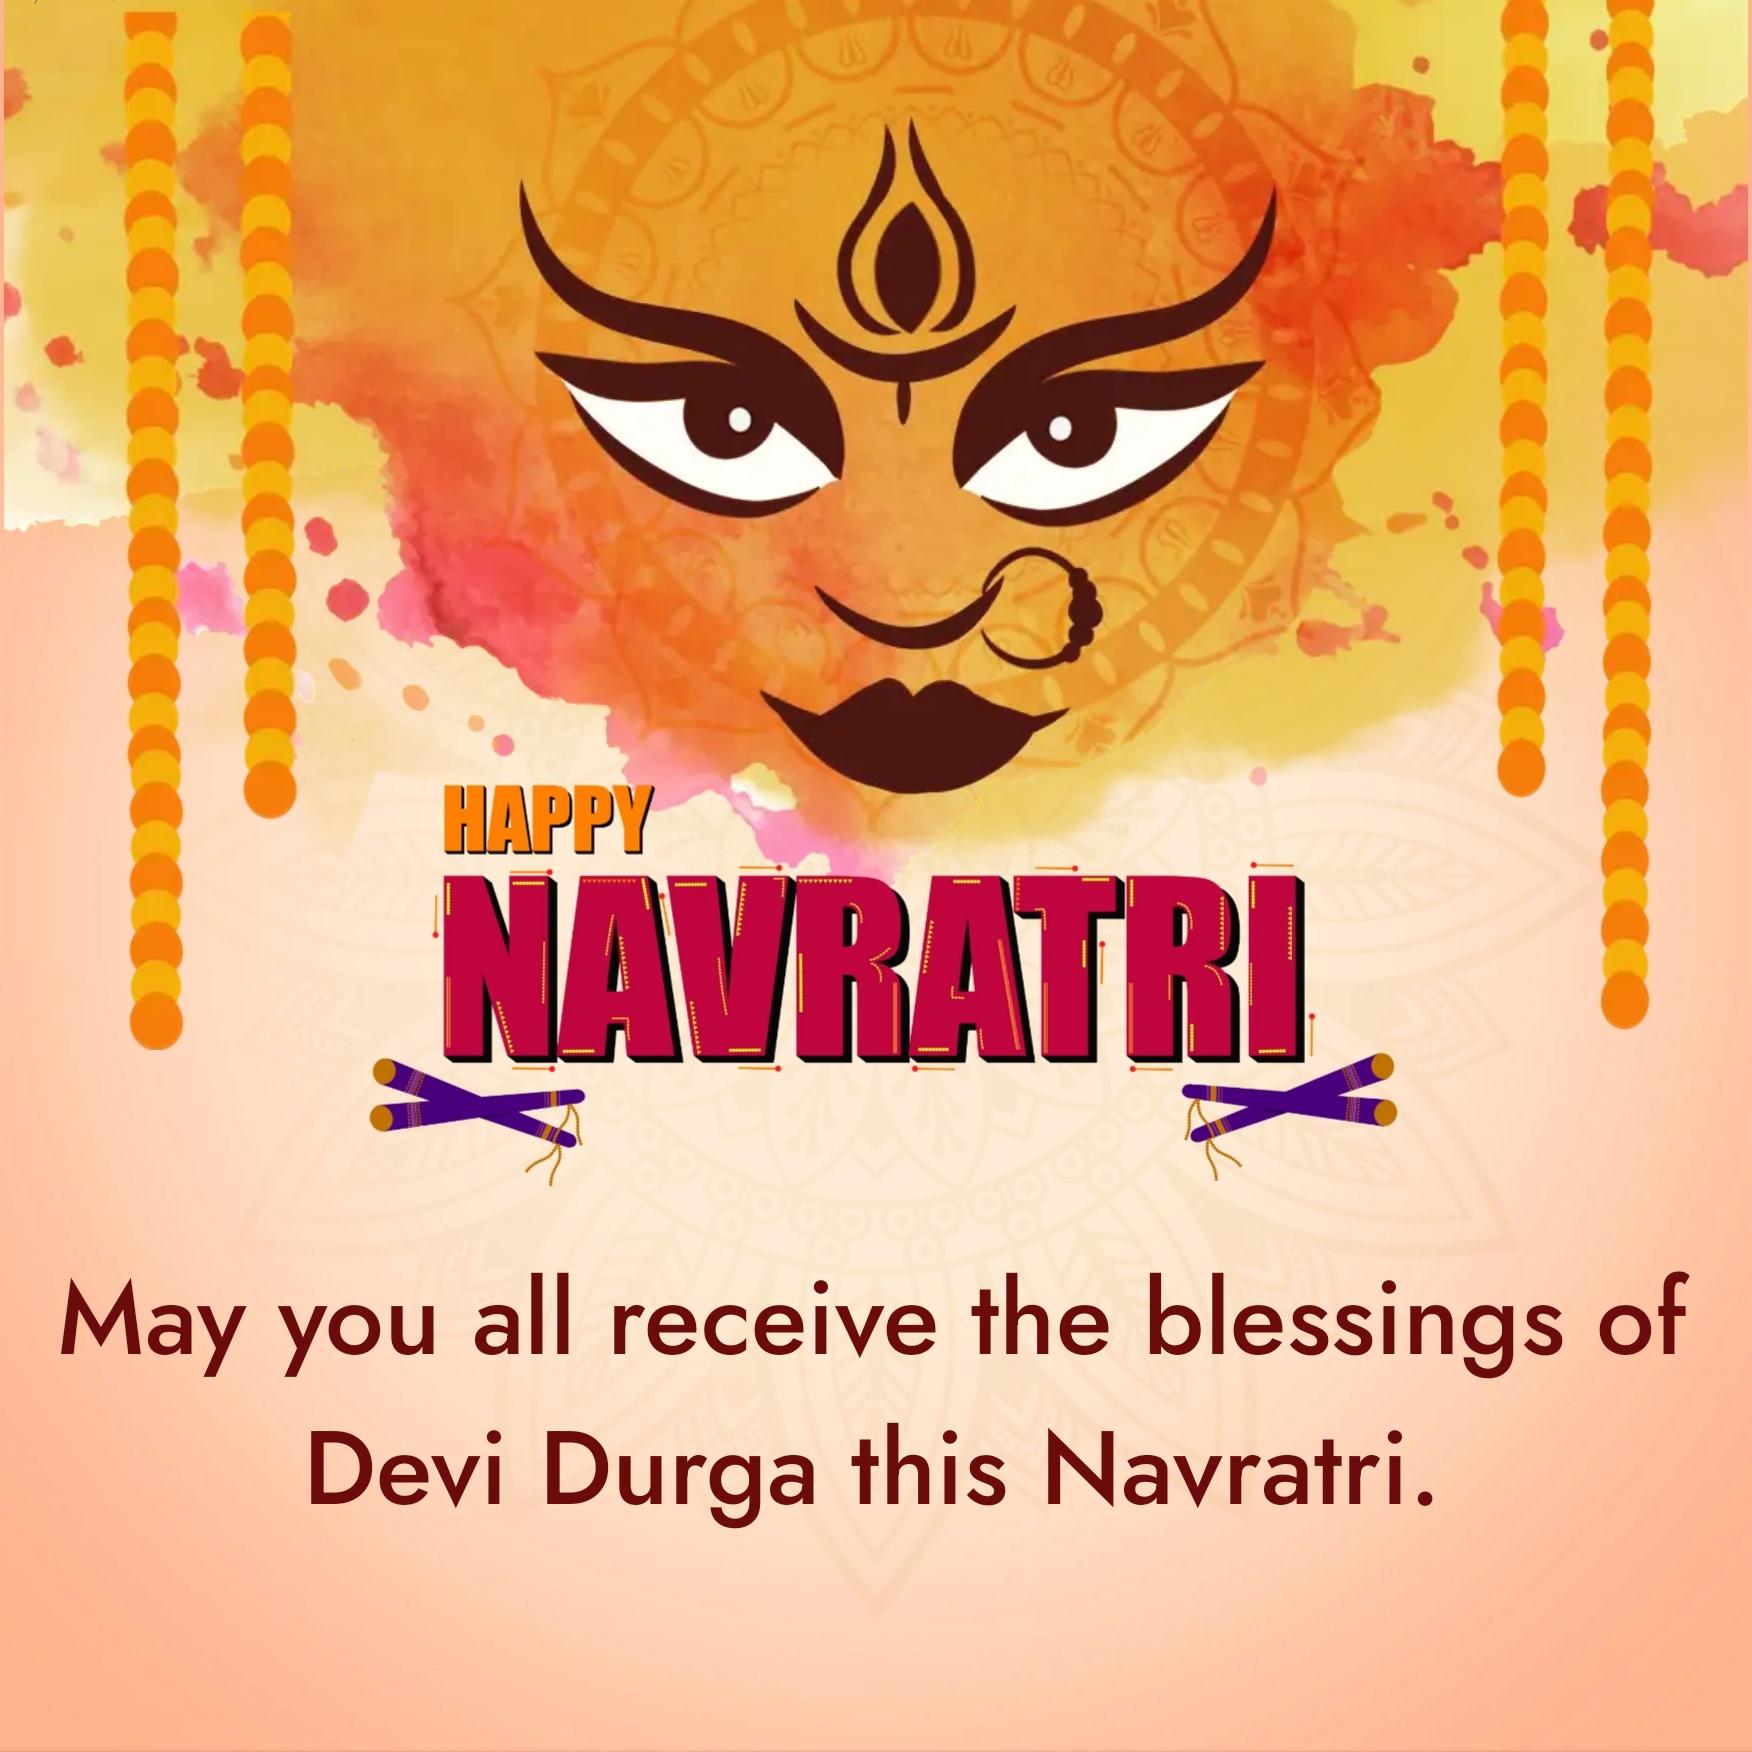 May you all receive the blessings of Devi Durga this Navratri